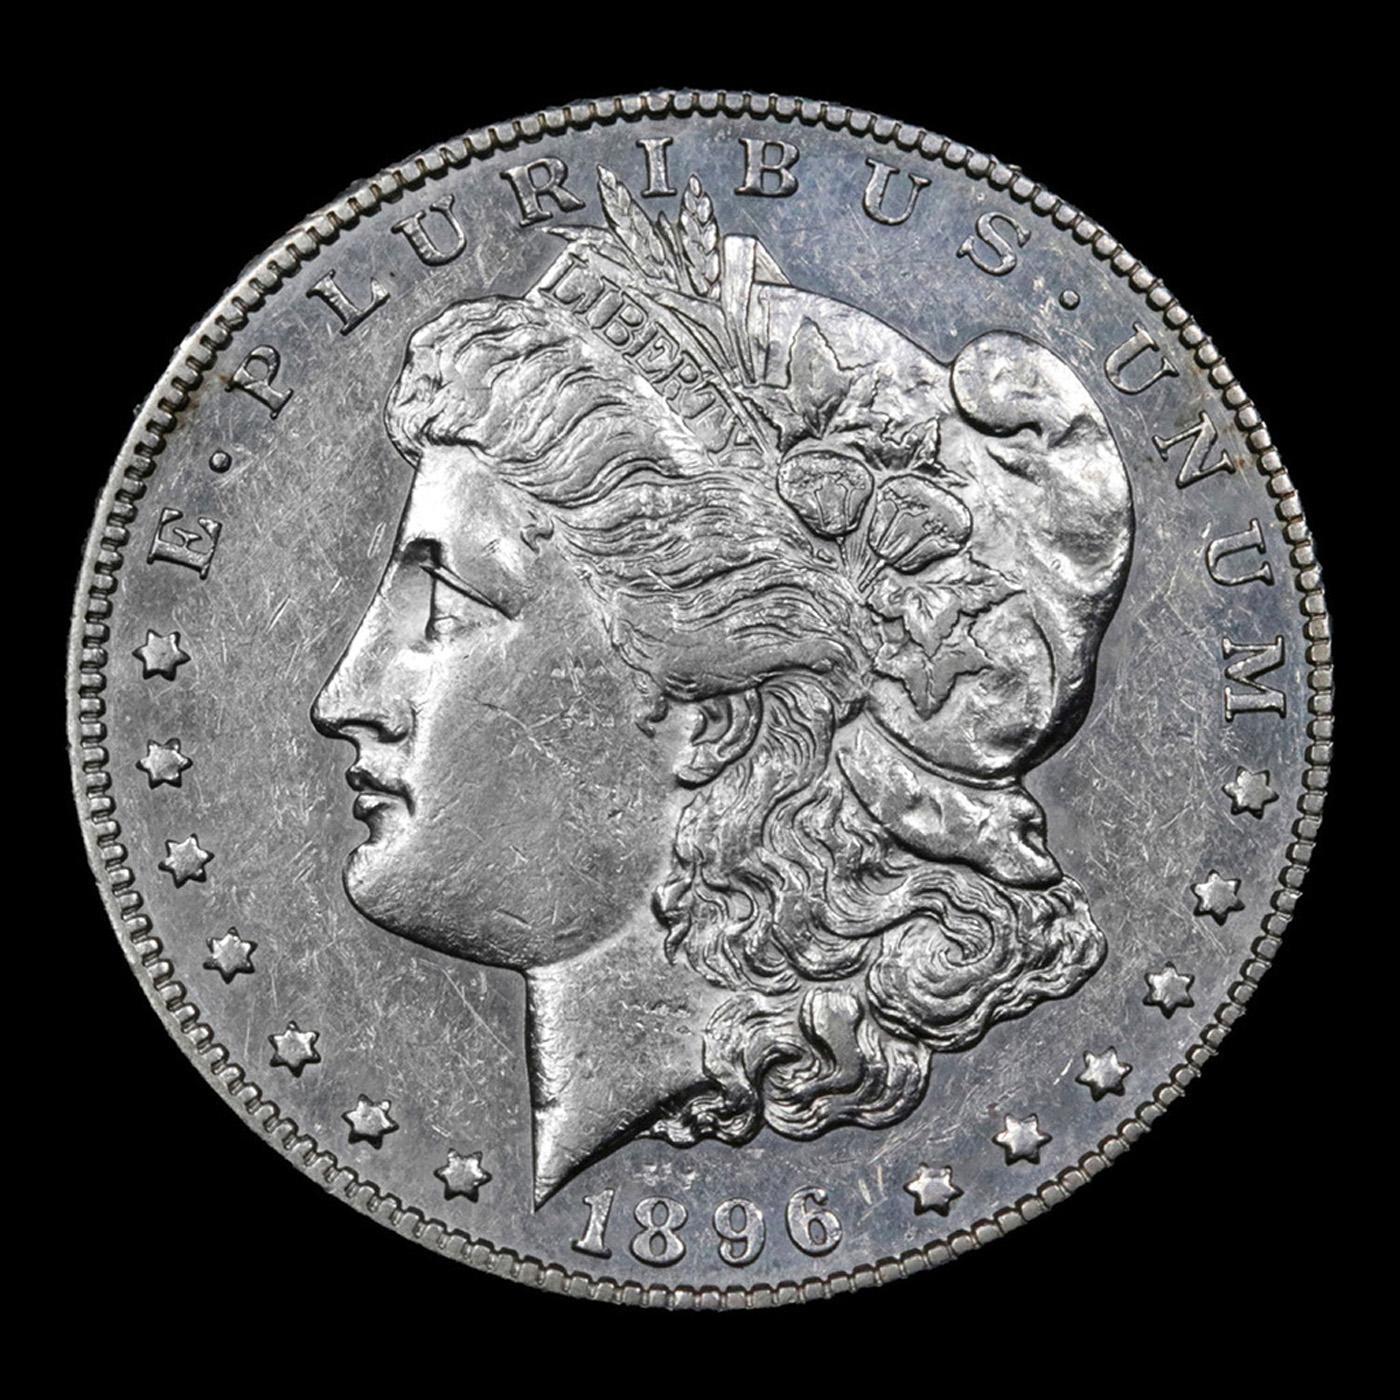 ***Auction Highlight*** 1896-s Morgan Dollar $1 Graded Select Unc PL By USCG (fc)